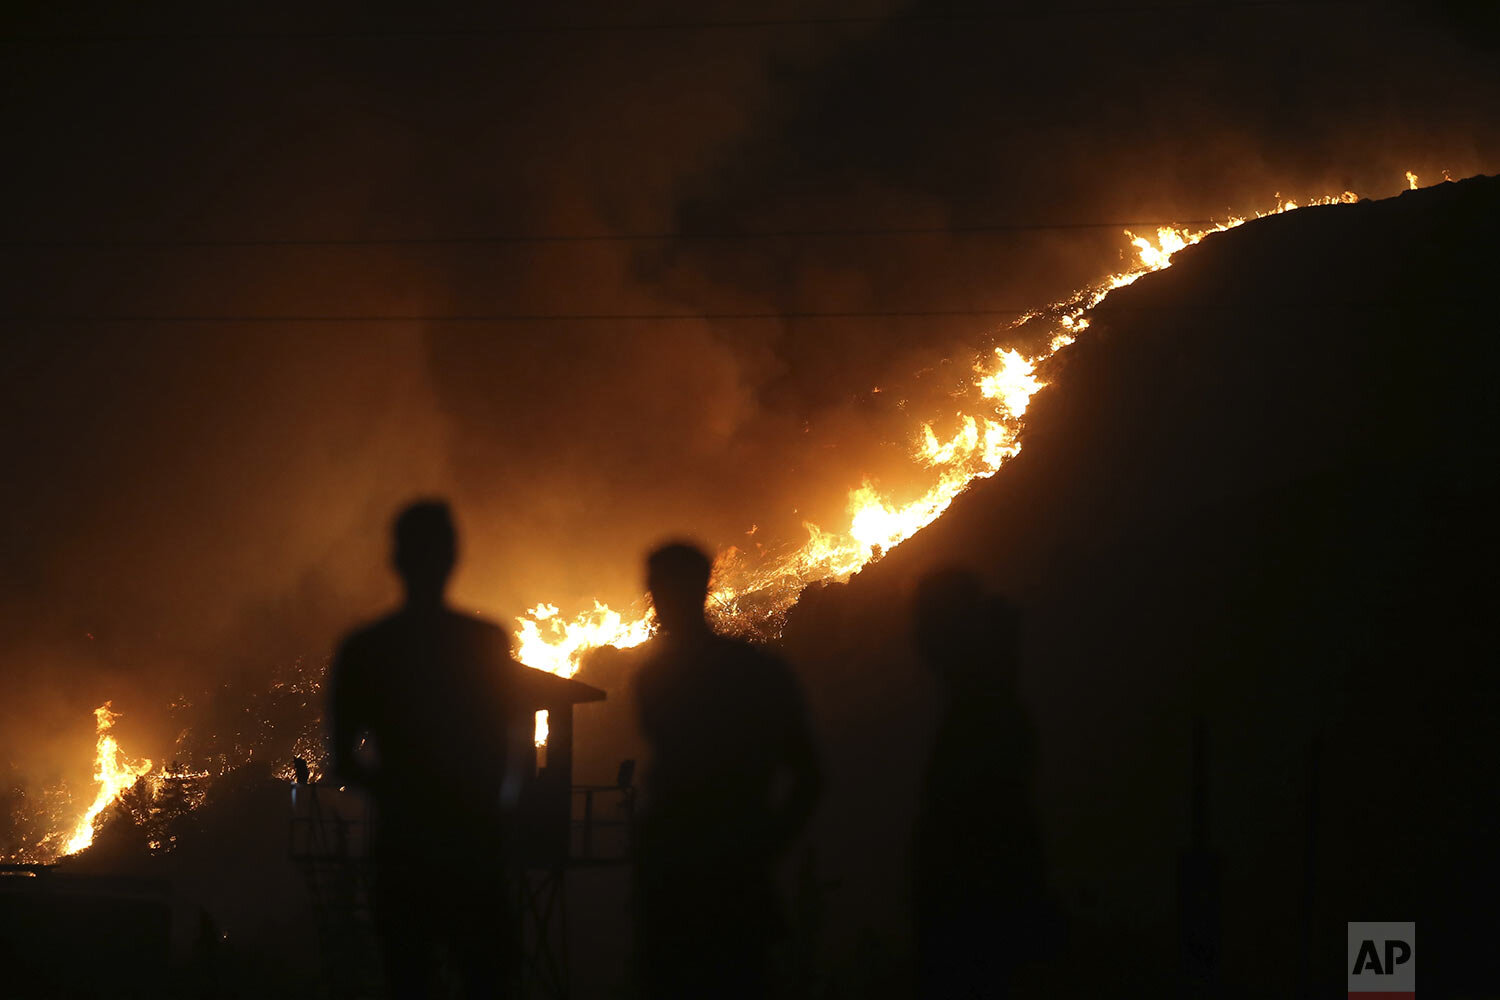  People stand in front of Kemerkoy Thermal Power Plant with the blaze approaching in the background, in Milas, Mugla, Turkey, Tuesday, Aug. 3, 2021. Turkish President Recep Tayyip ErdoganÕs government is facing increased criticism over its apparent p